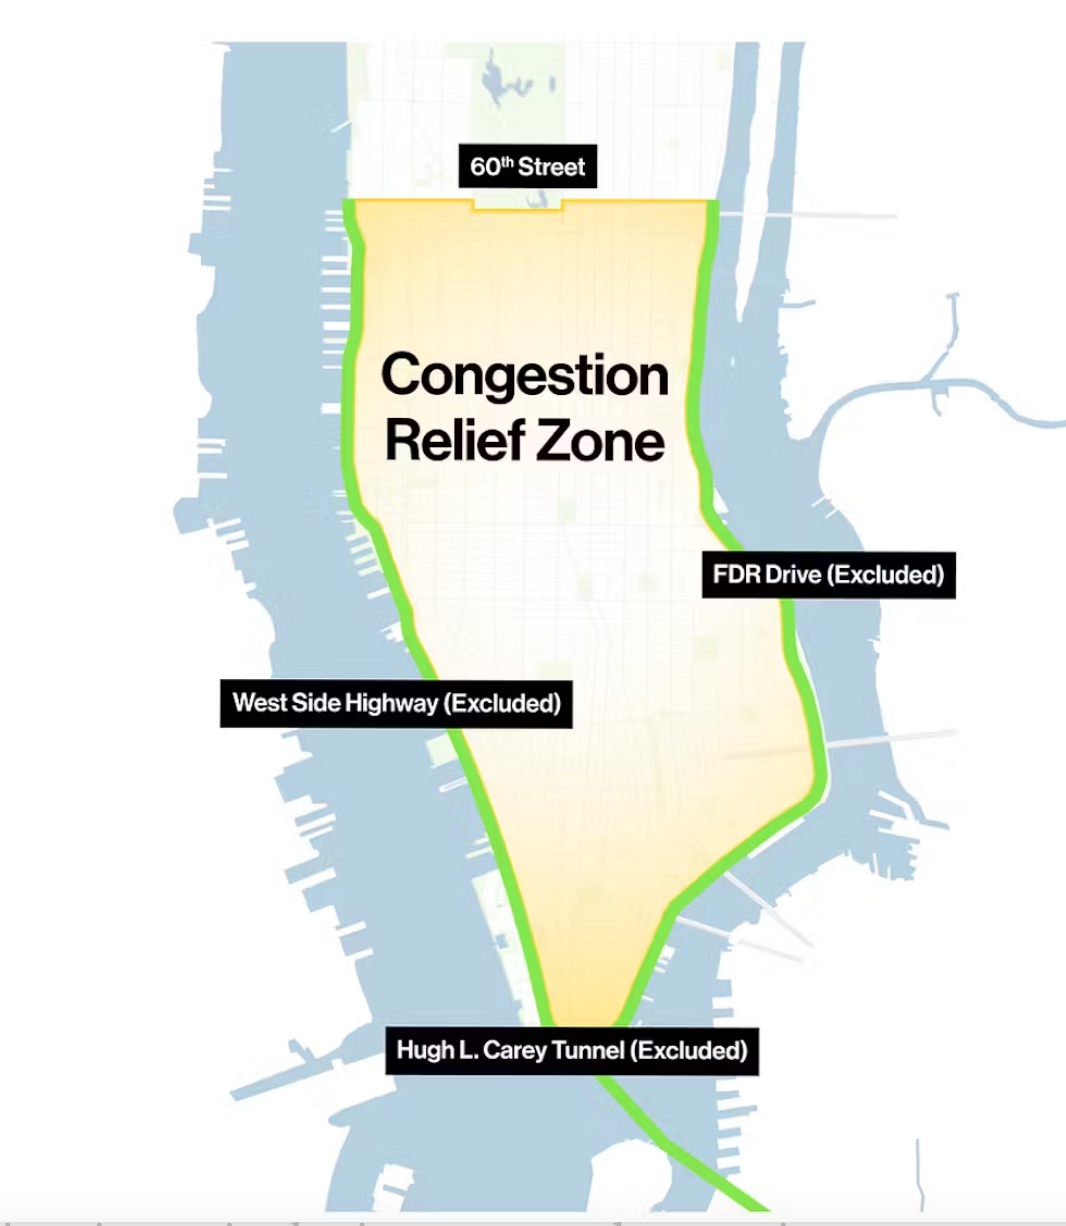 Map showing the congestion relief zone in manhattan, excluding fdr drive, west side highway, and hugh l. carey tunnel.